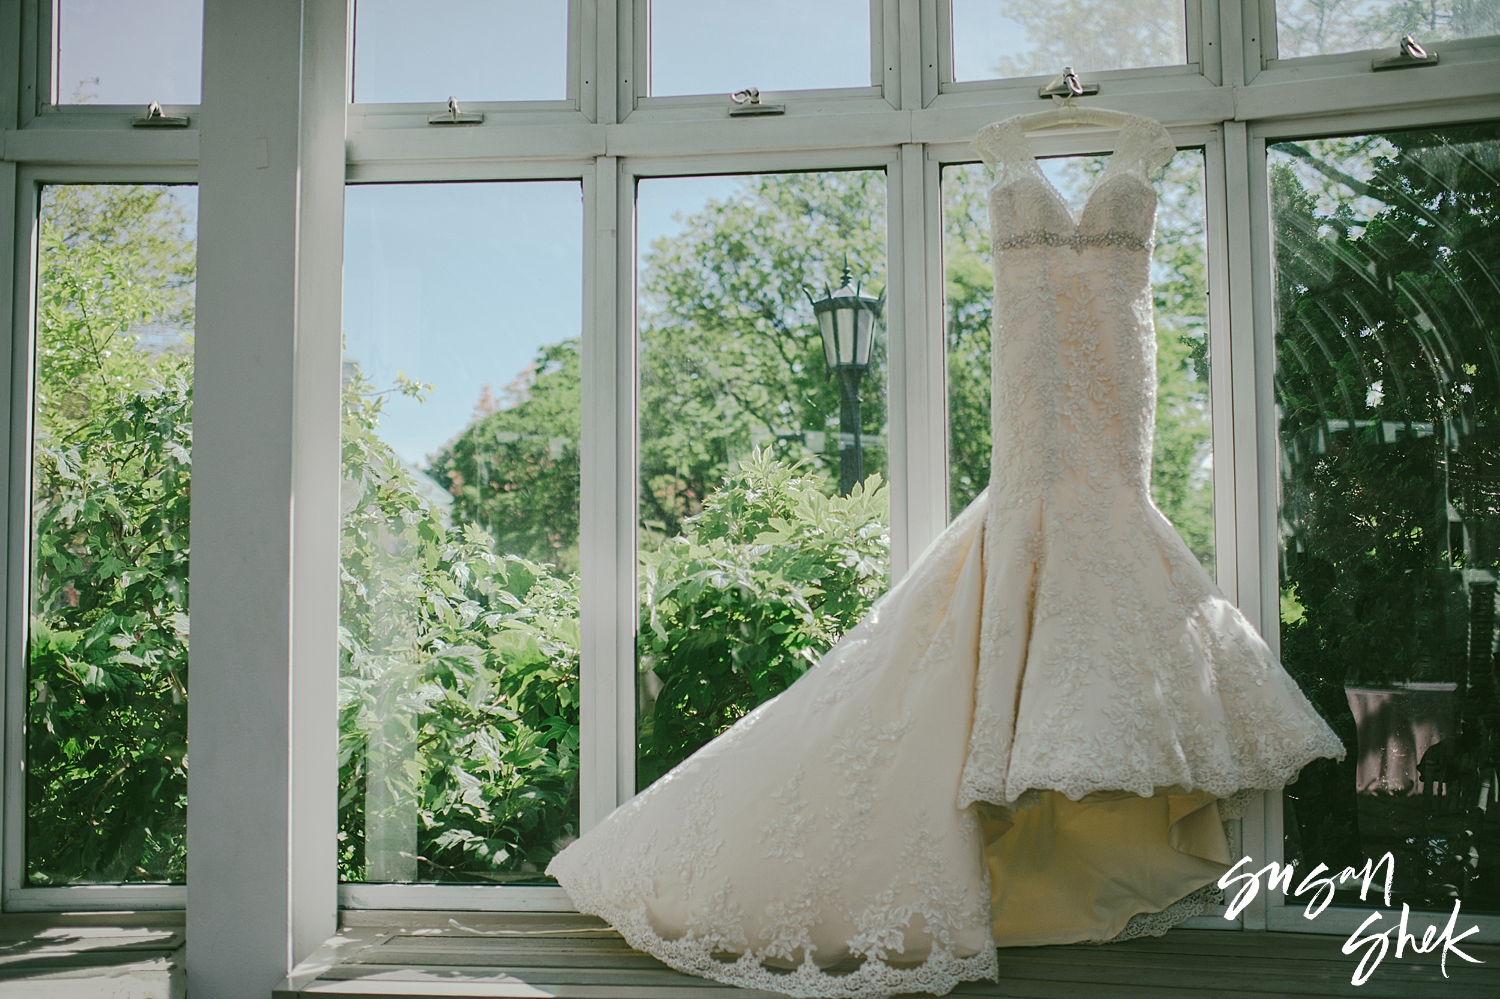 How to preserve your wedding dress | Susan Shek Photography